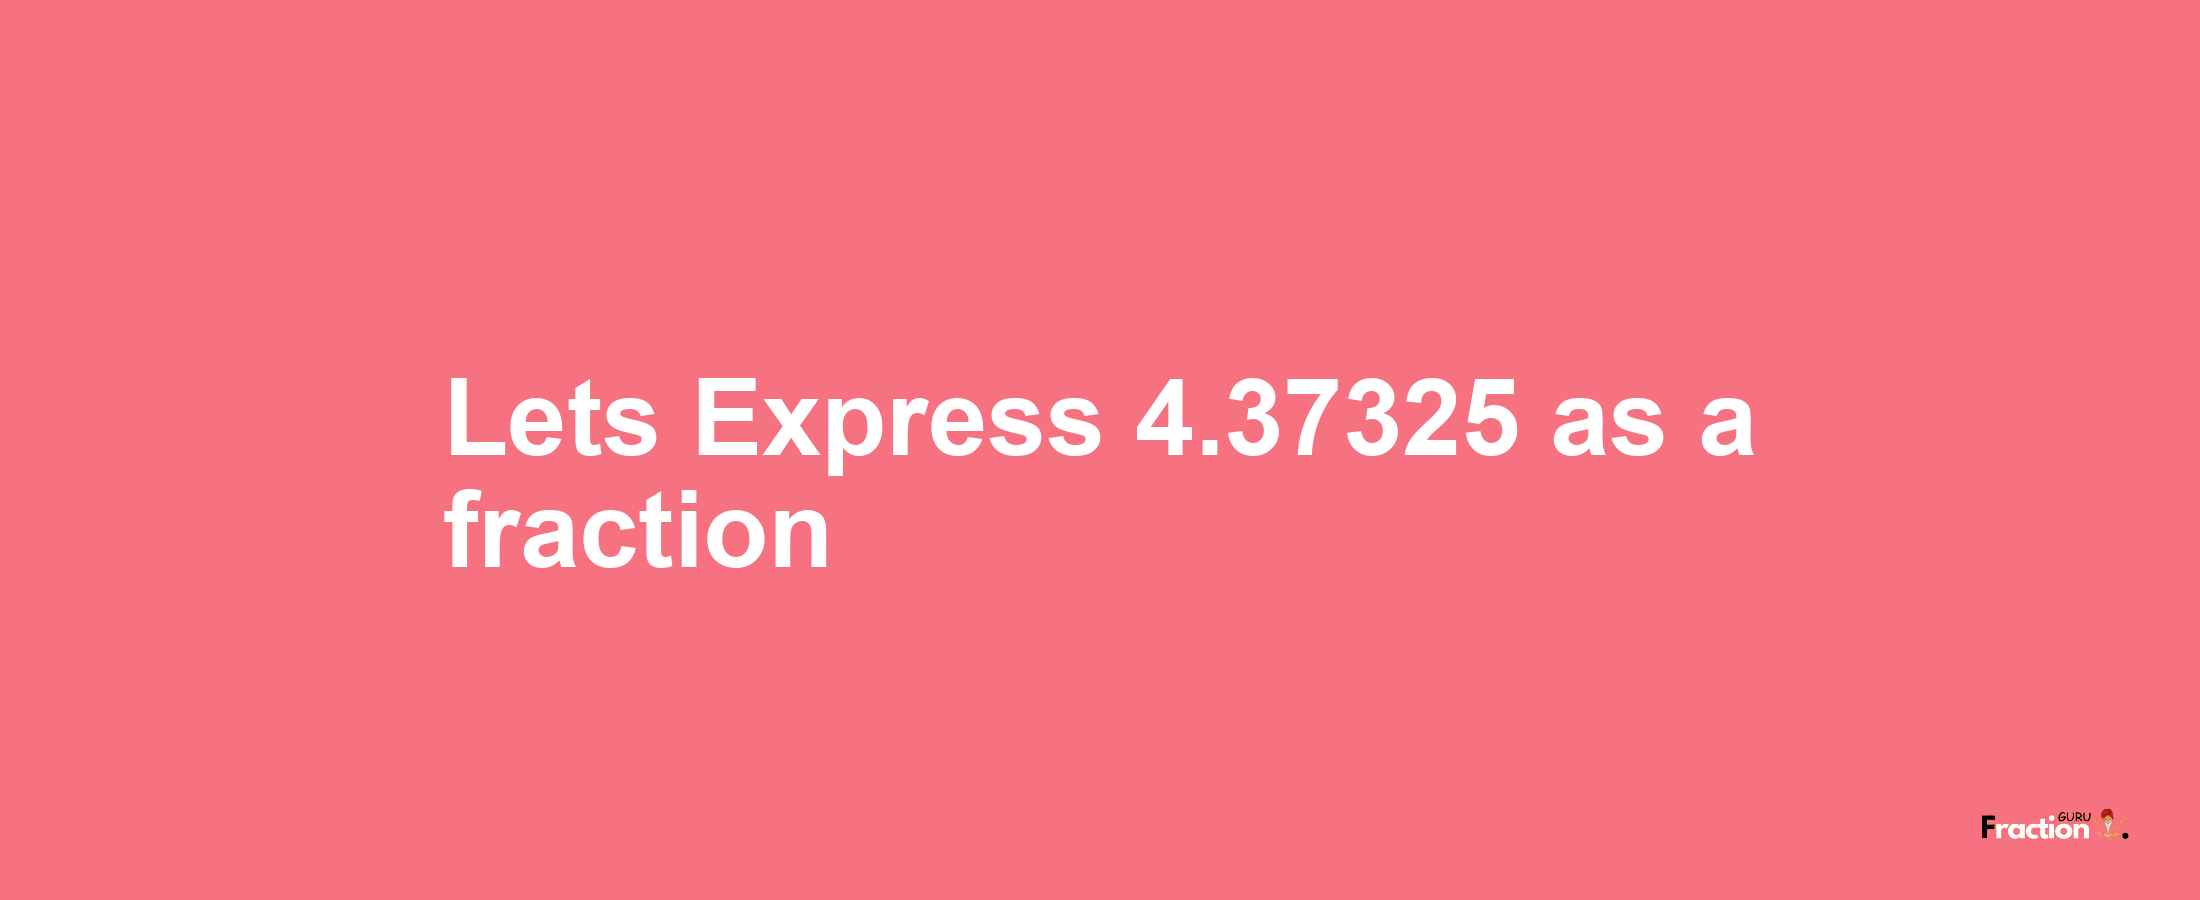 Lets Express 4.37325 as afraction